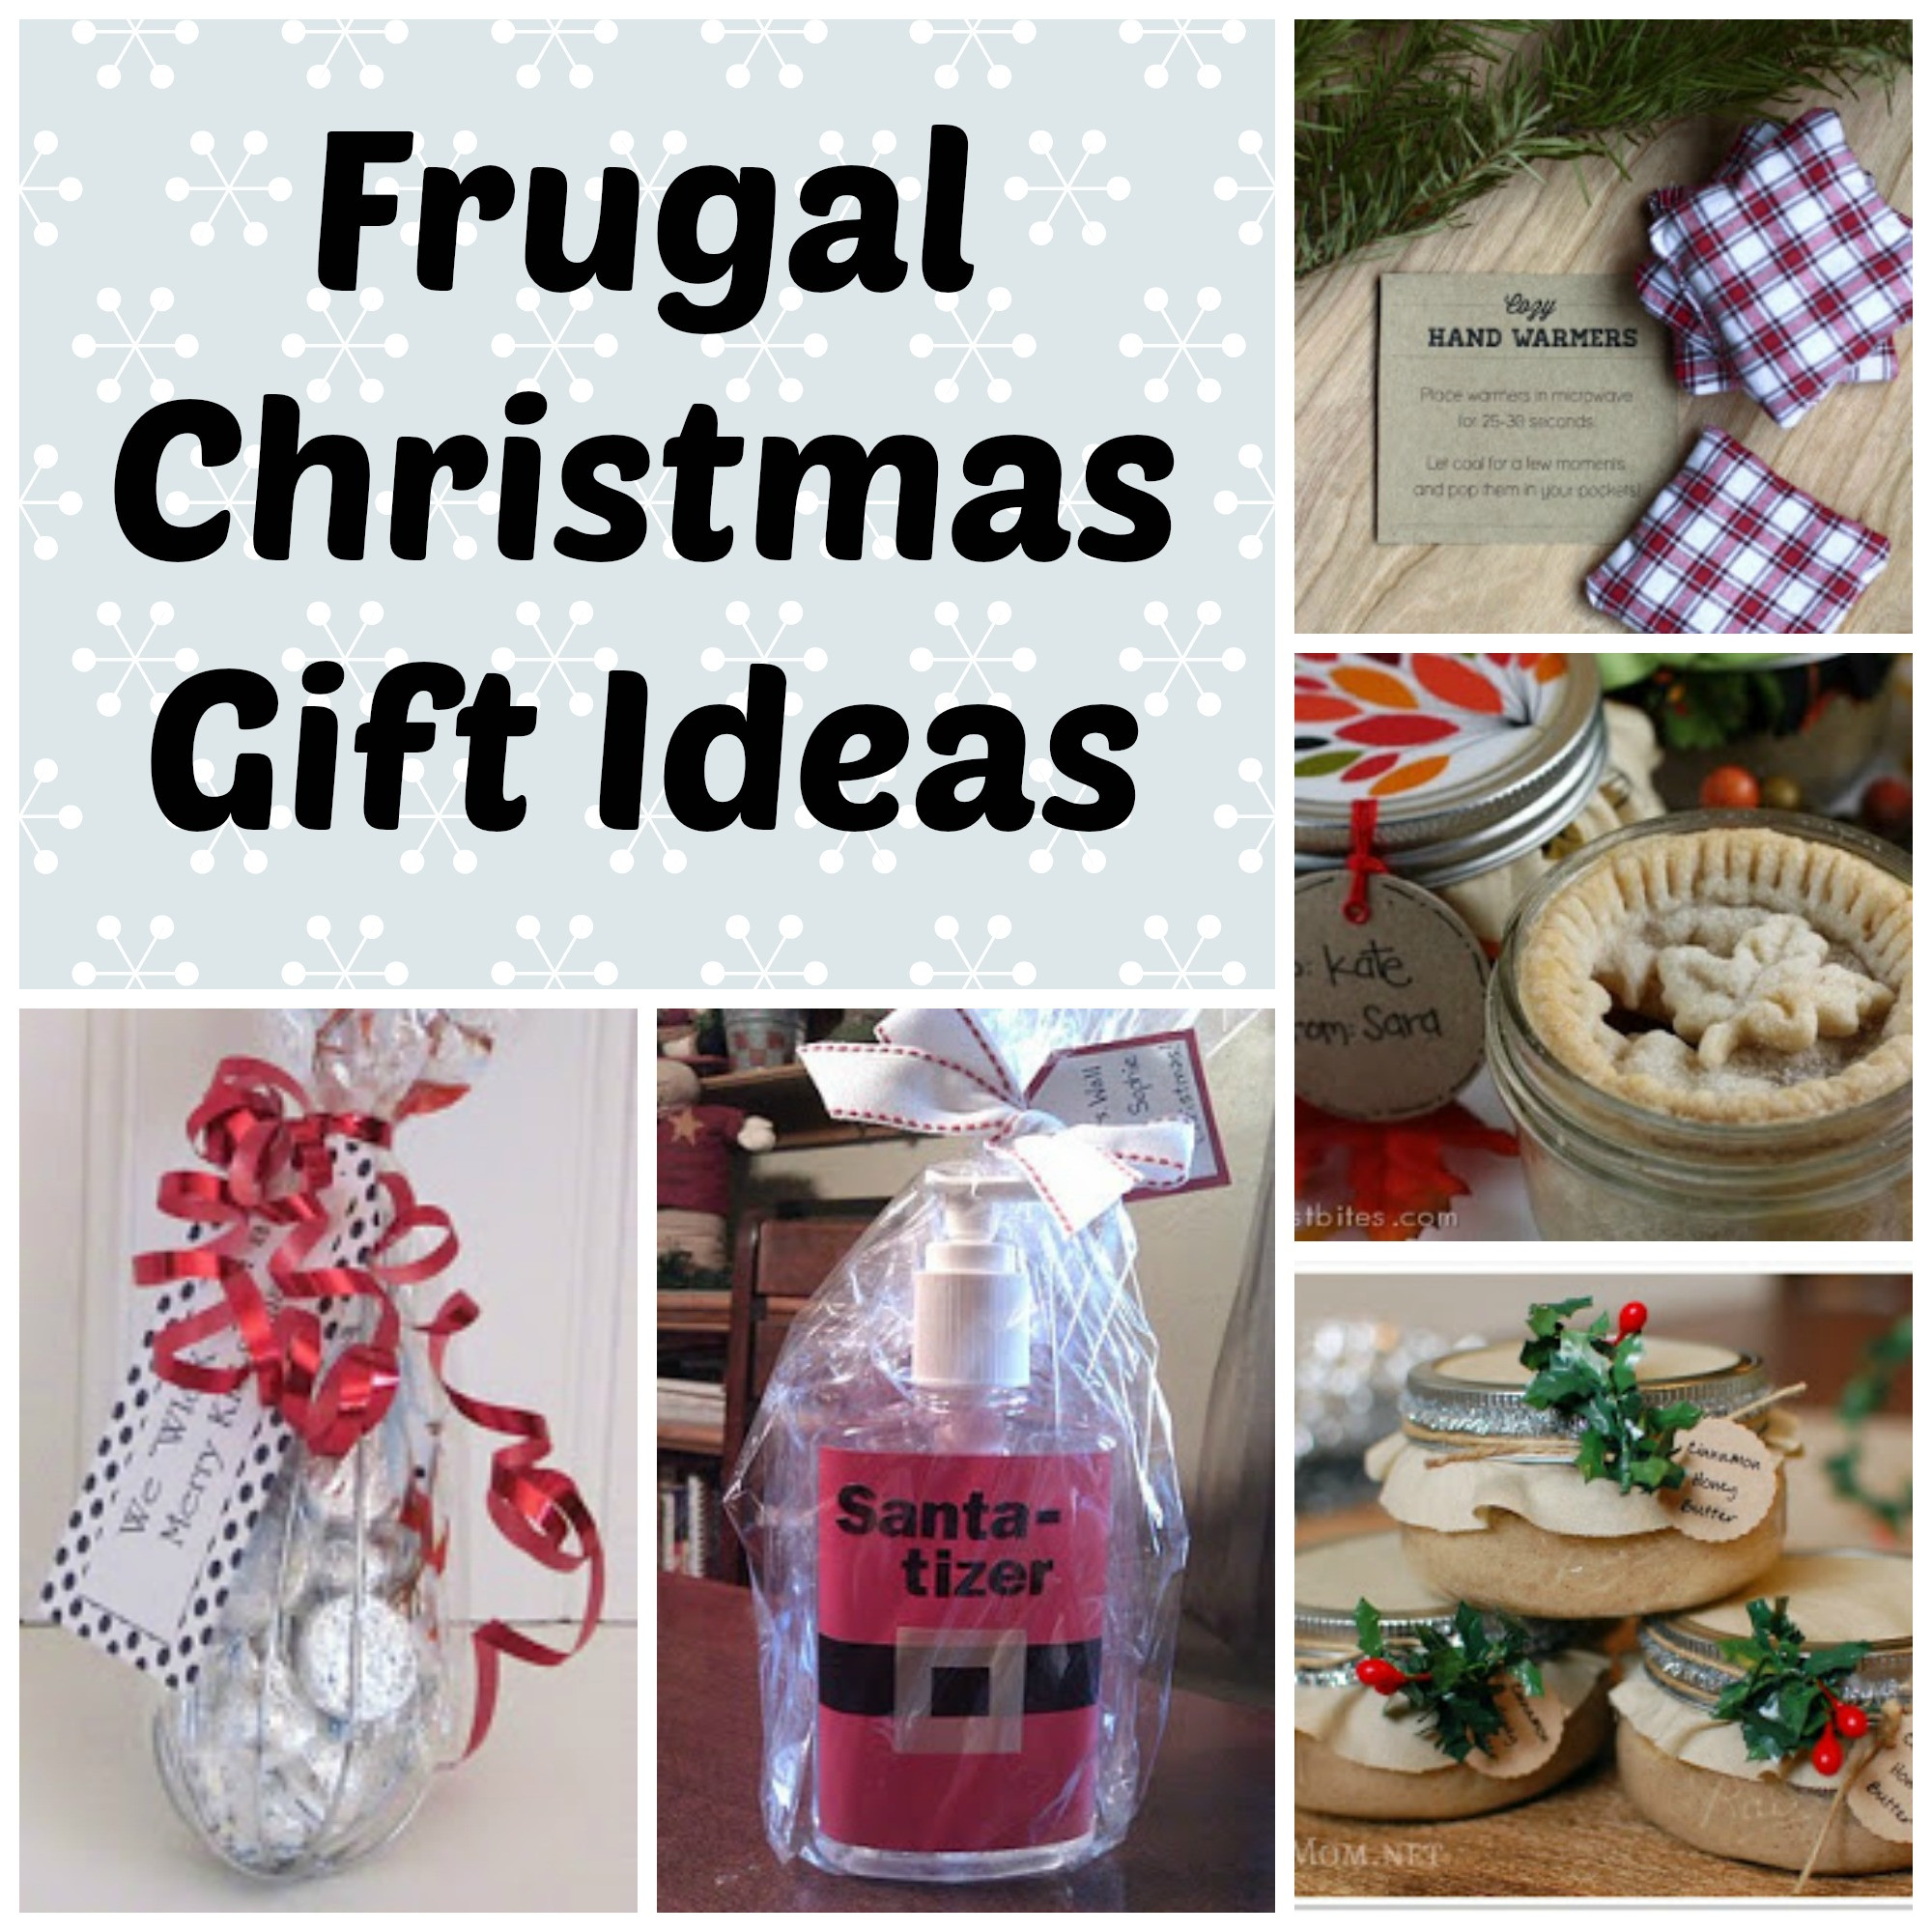 Christmas Gift Ideas For Family
 Frugal Christmas Gifts for Family Friends or Neighbors